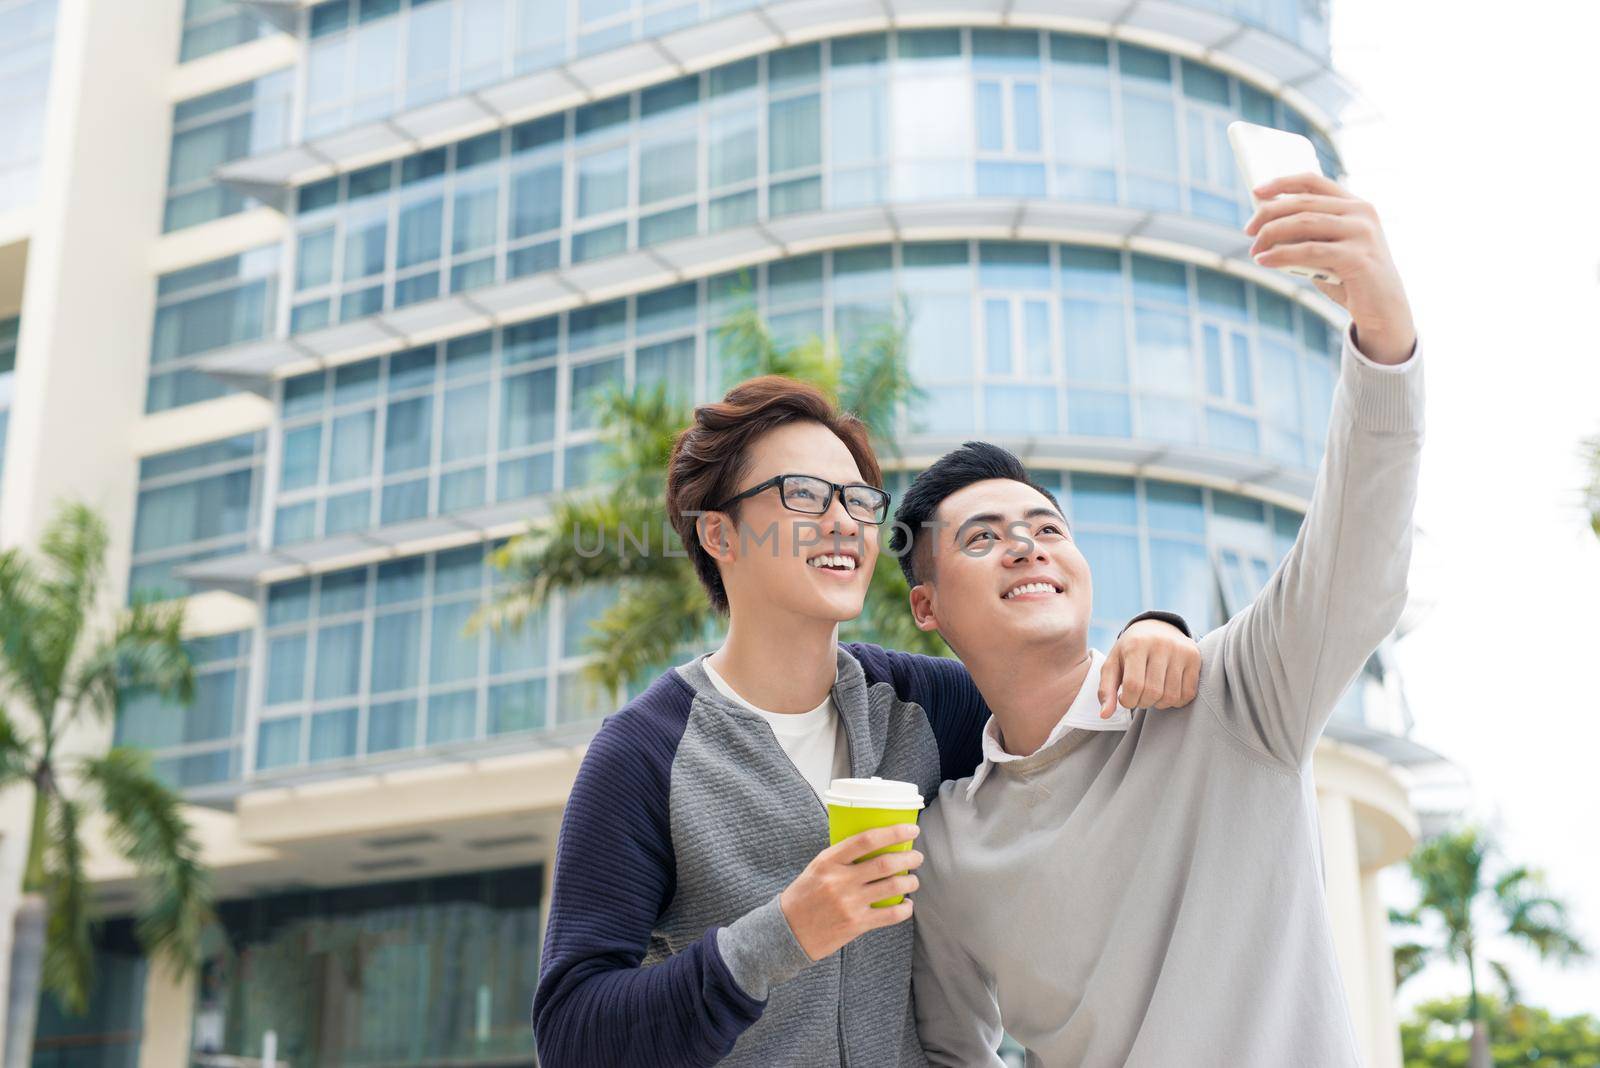 Two Vietnamese men traveler taking selfie in foreign city by makidotvn